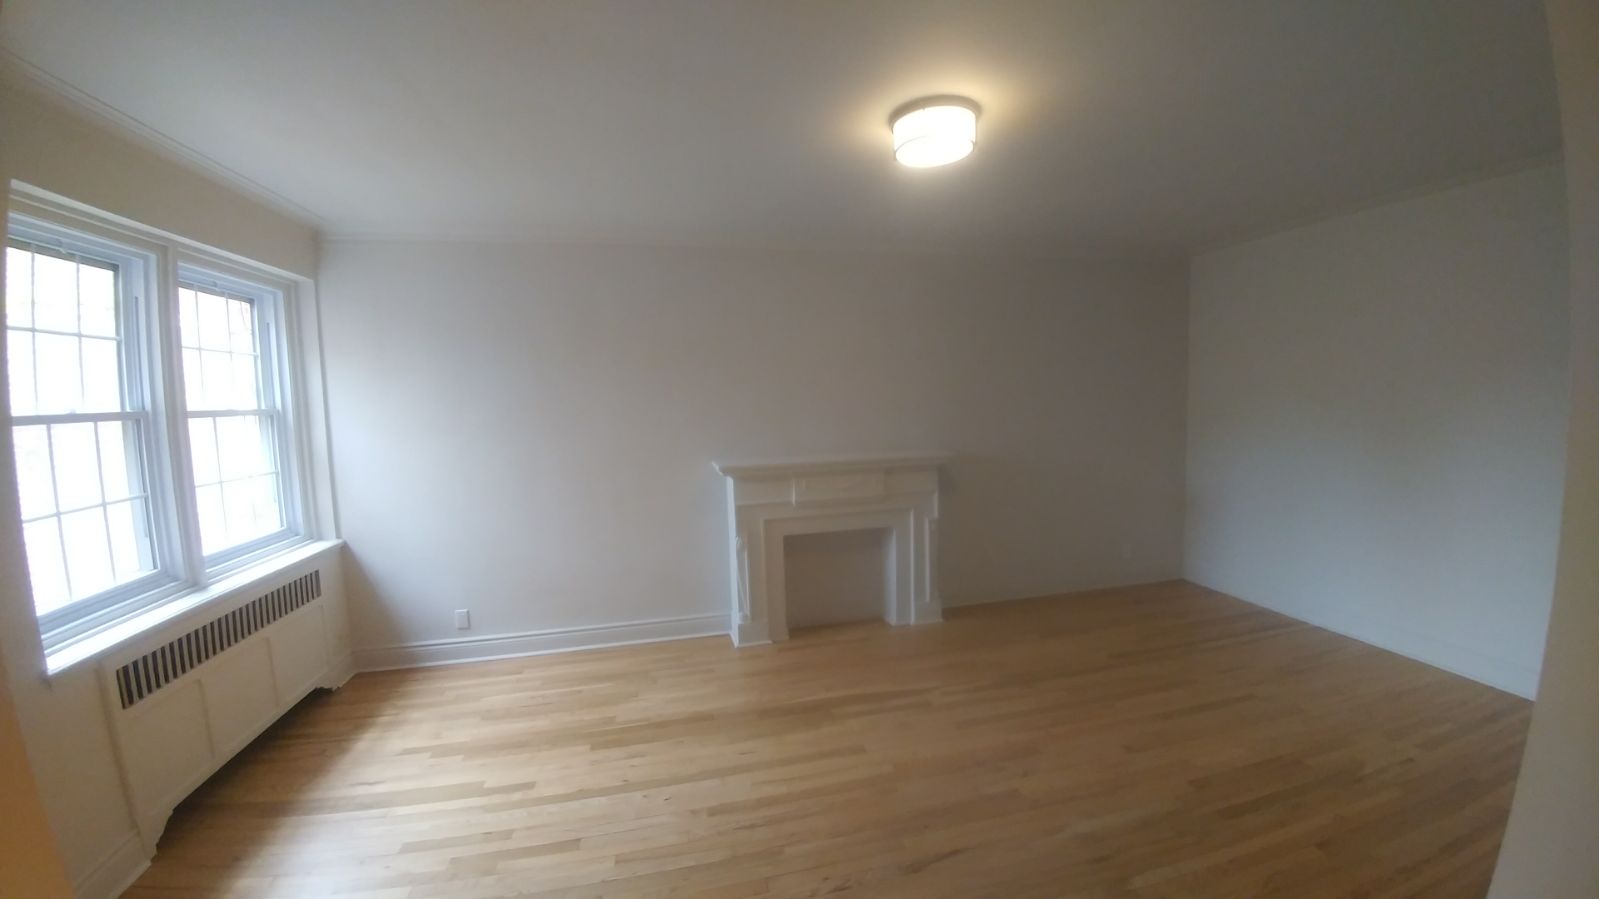 2 bedroom Apartments for rent in Hampstead at 1-2 Ellerdale - Photo 11 - RentQuebecApartments – L9523